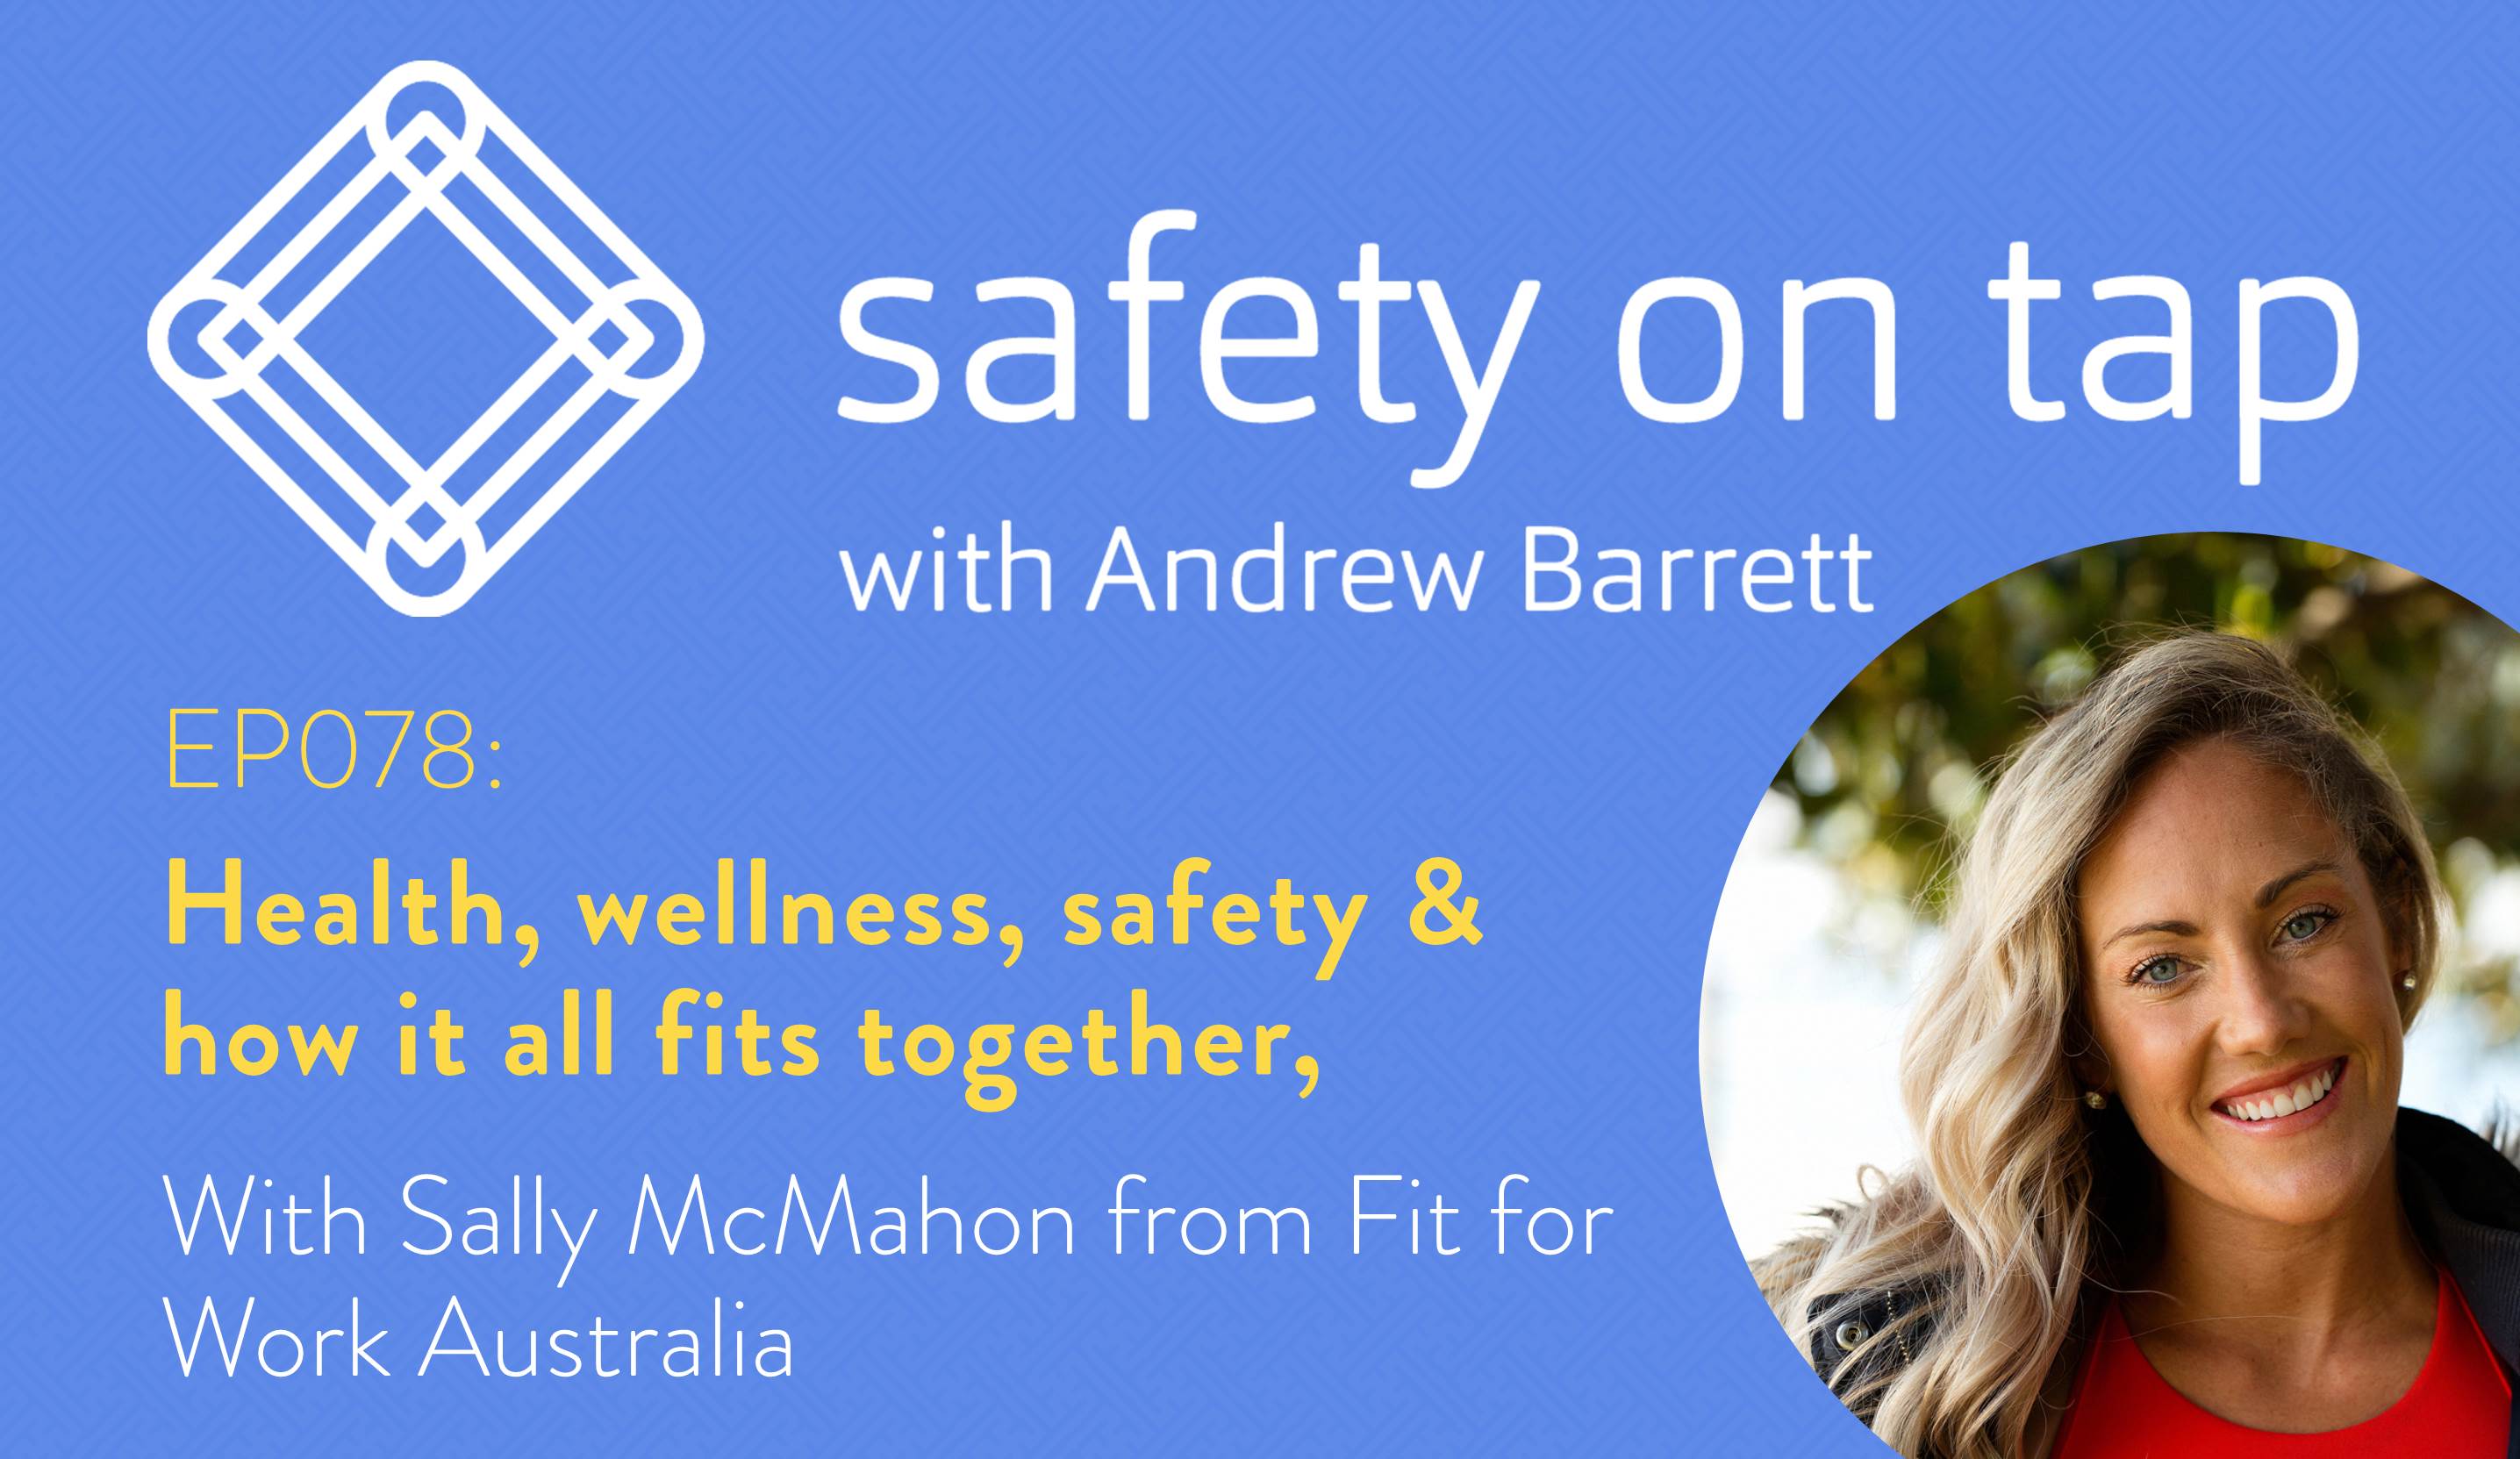 Ep078: Health, wellness, safety & how it all fits together, with Sally McMahon from Fit for Work Australia